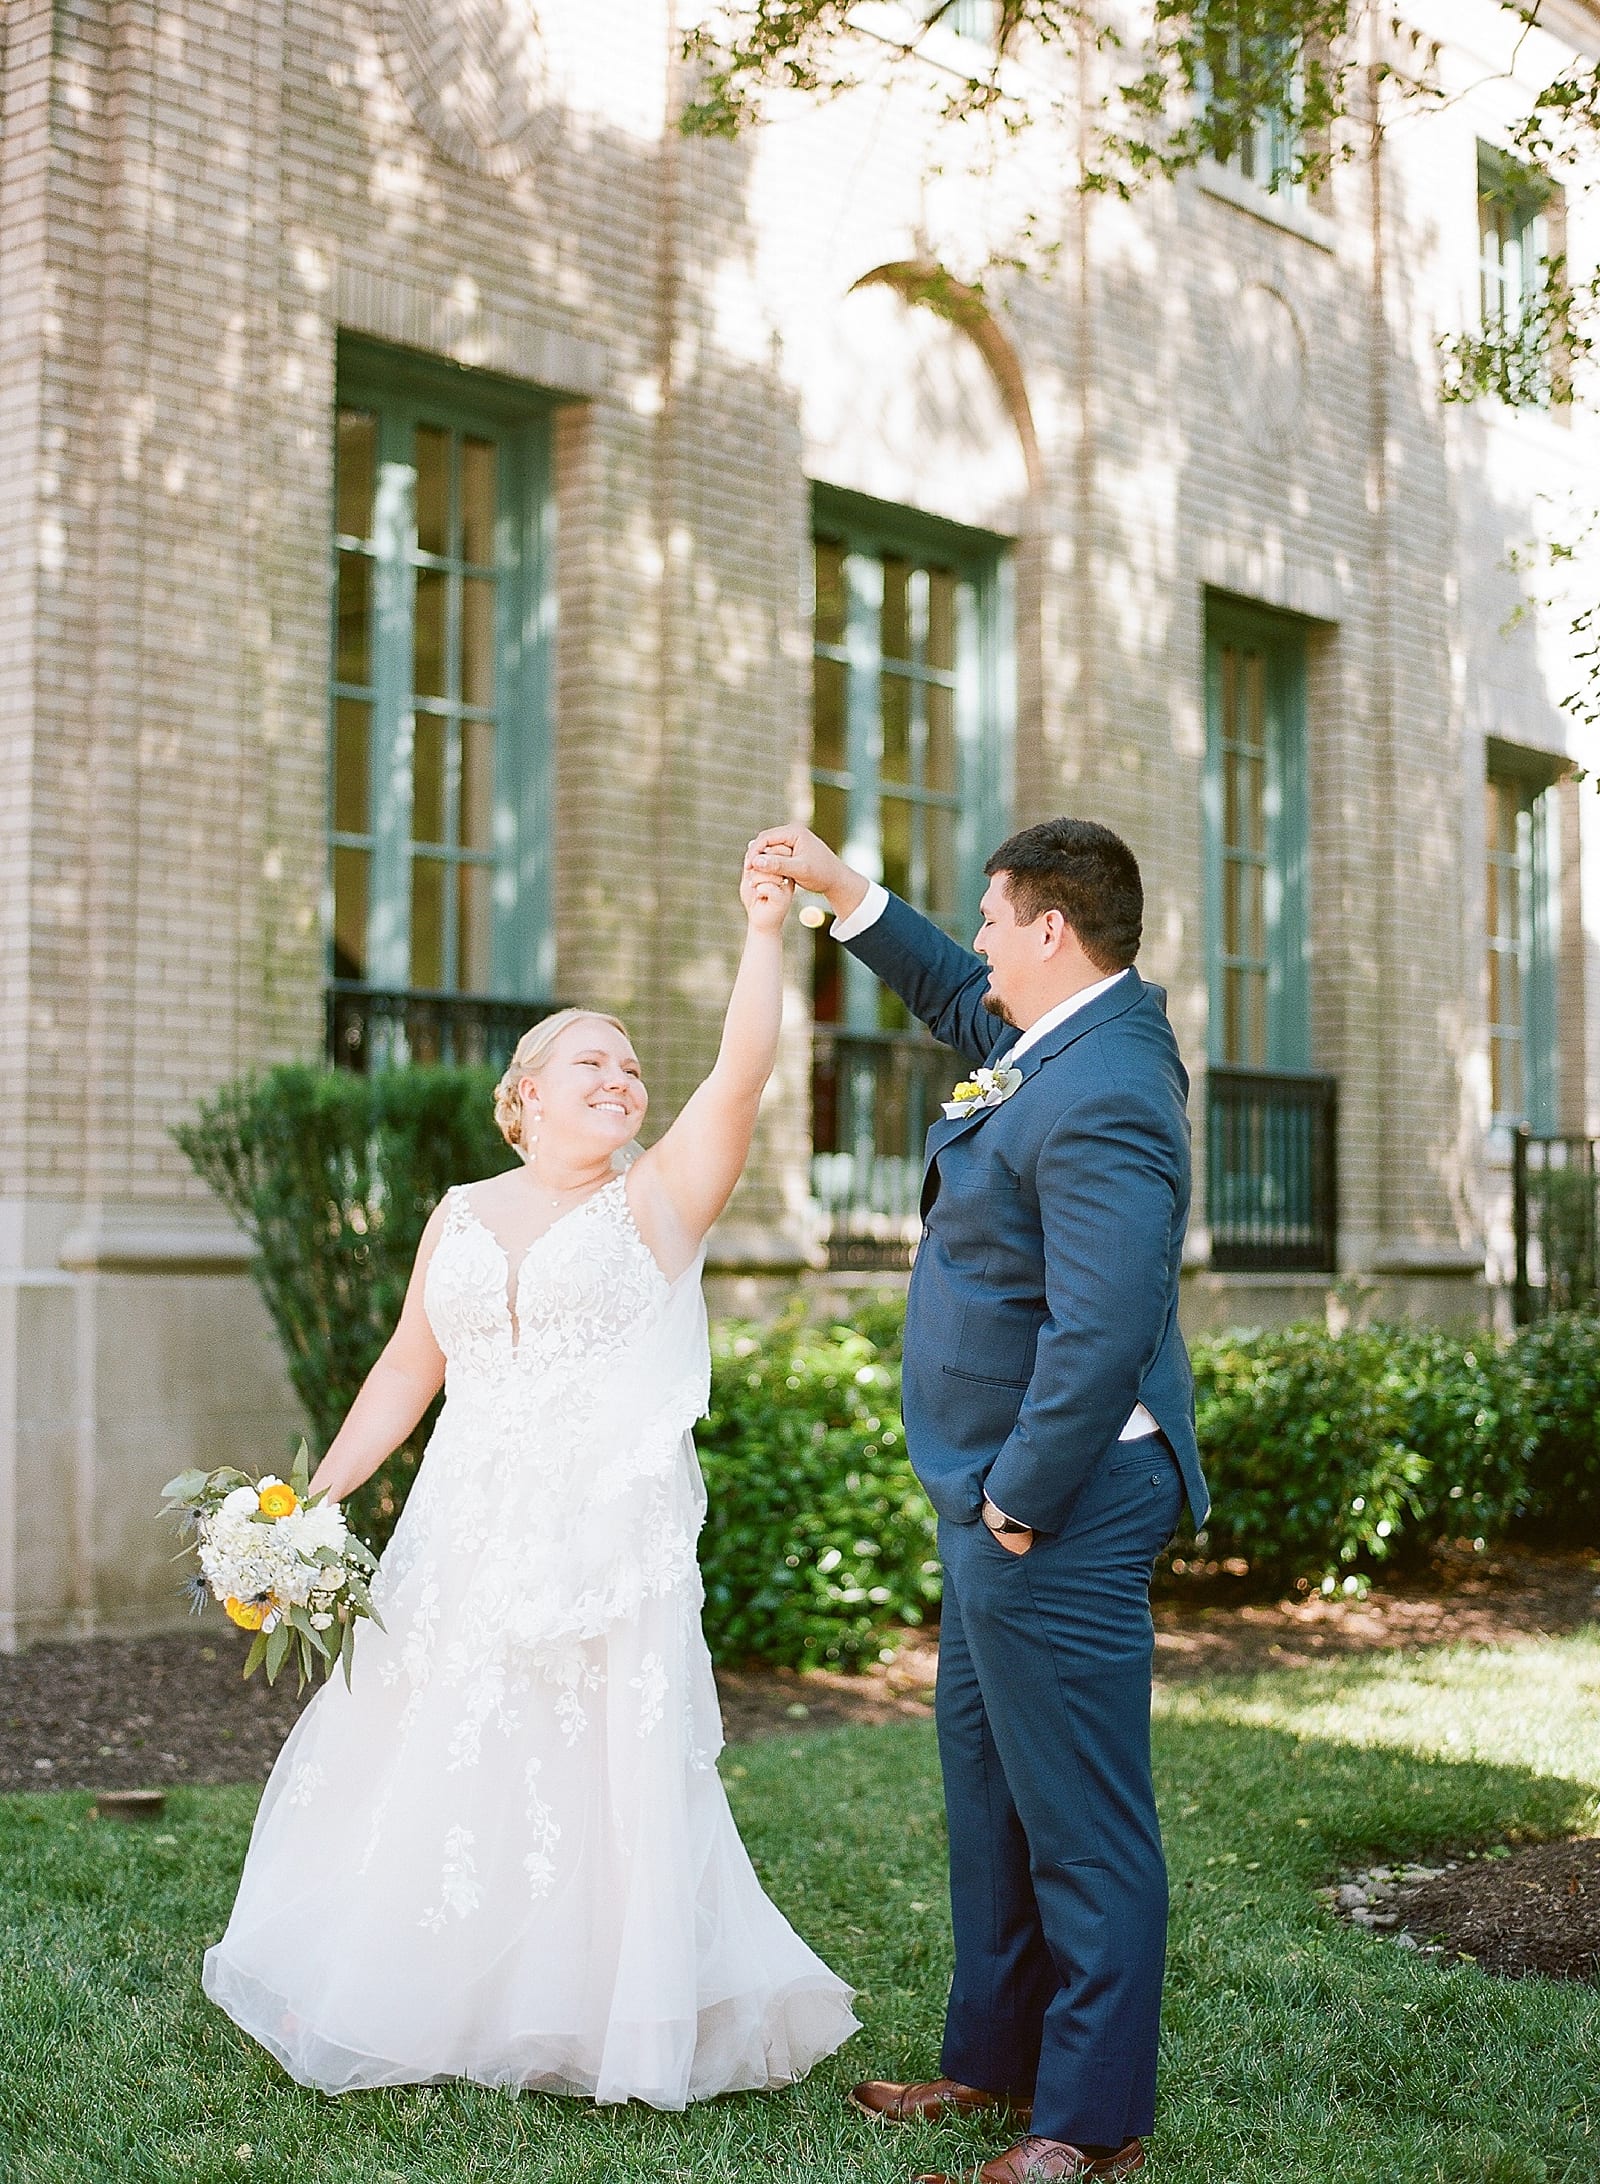 Bride Spinning With Groom Photo